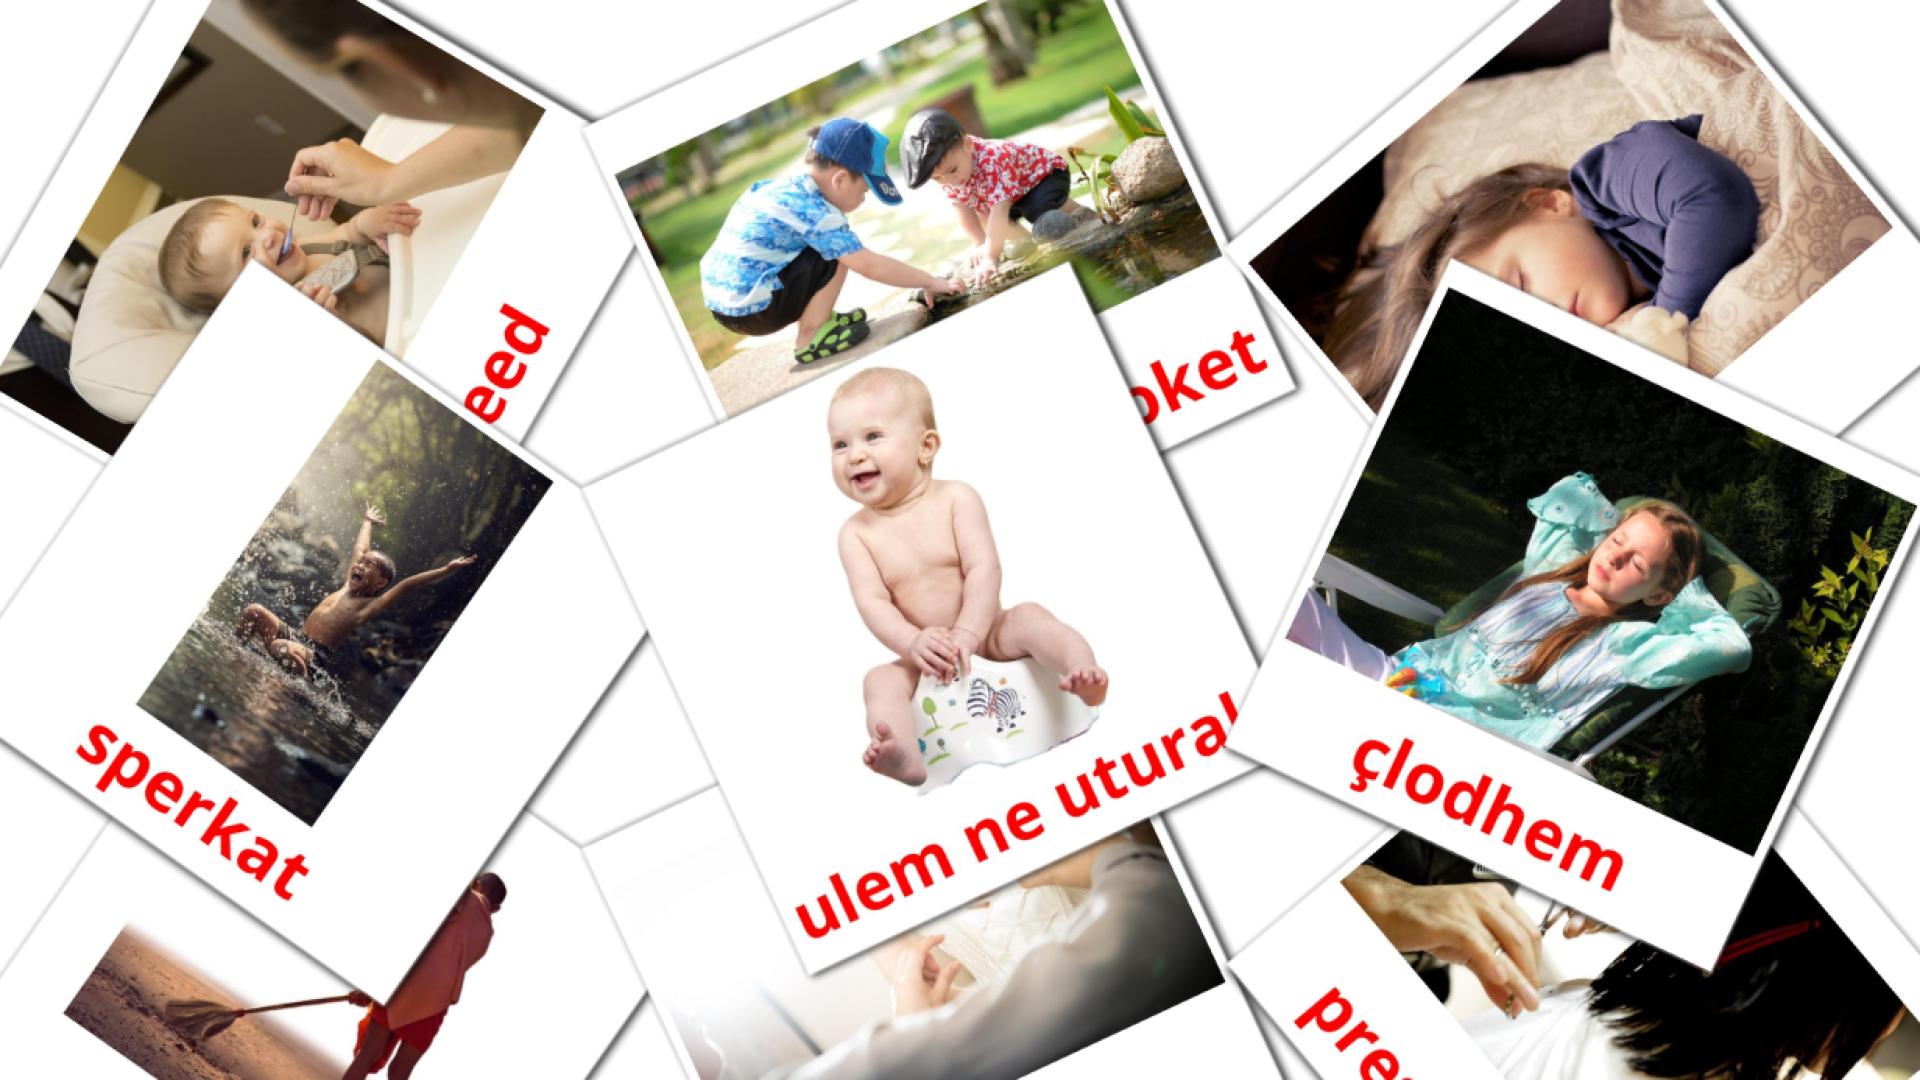 Routine verbs - albanian vocabulary cards